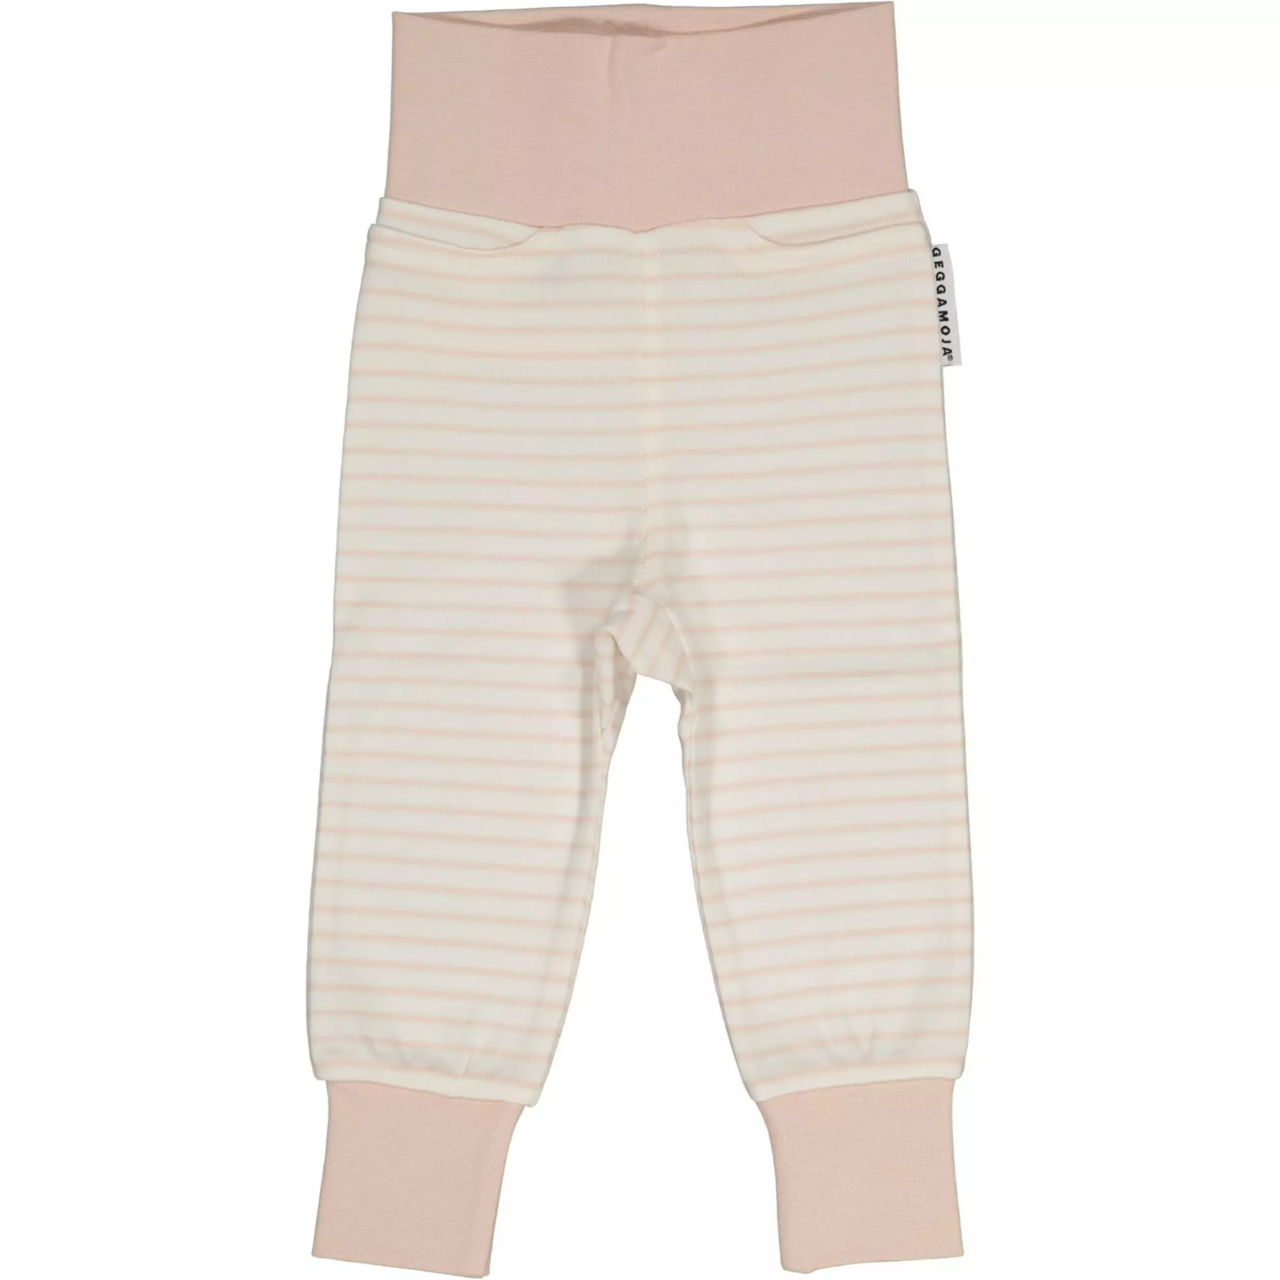 Baby trouser L.pink/offwhite 62/68